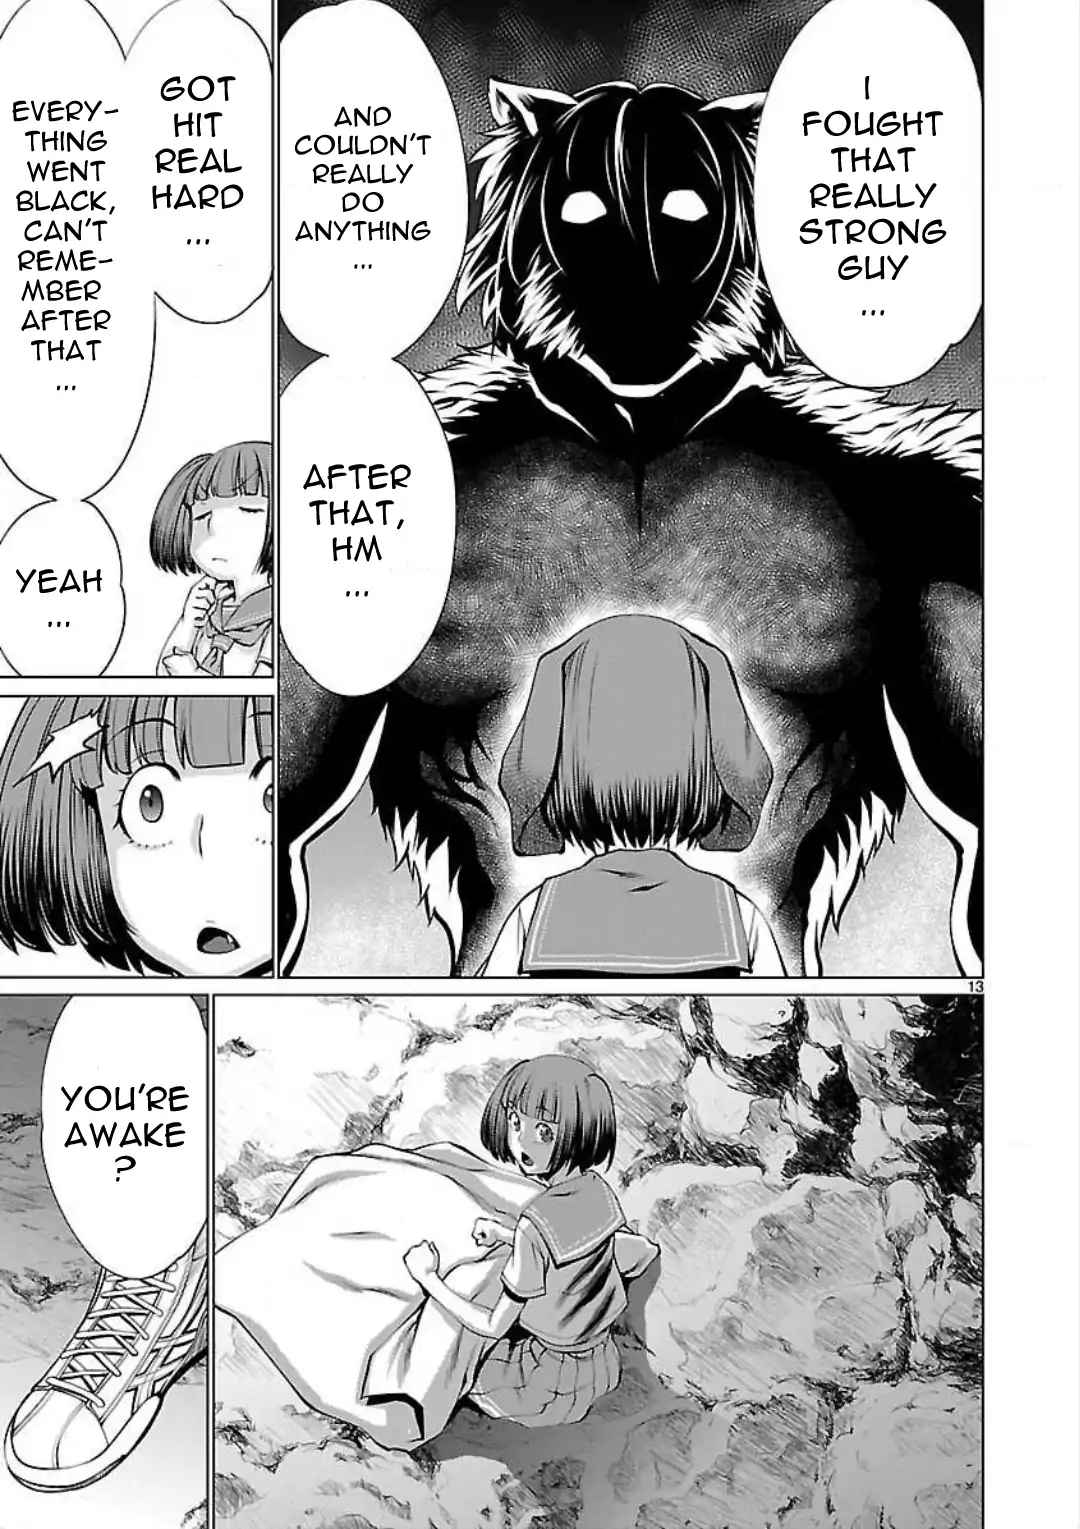 Killing Bites Vol. 10 Ch. 49 I Made a Friend for the First Time in my Life